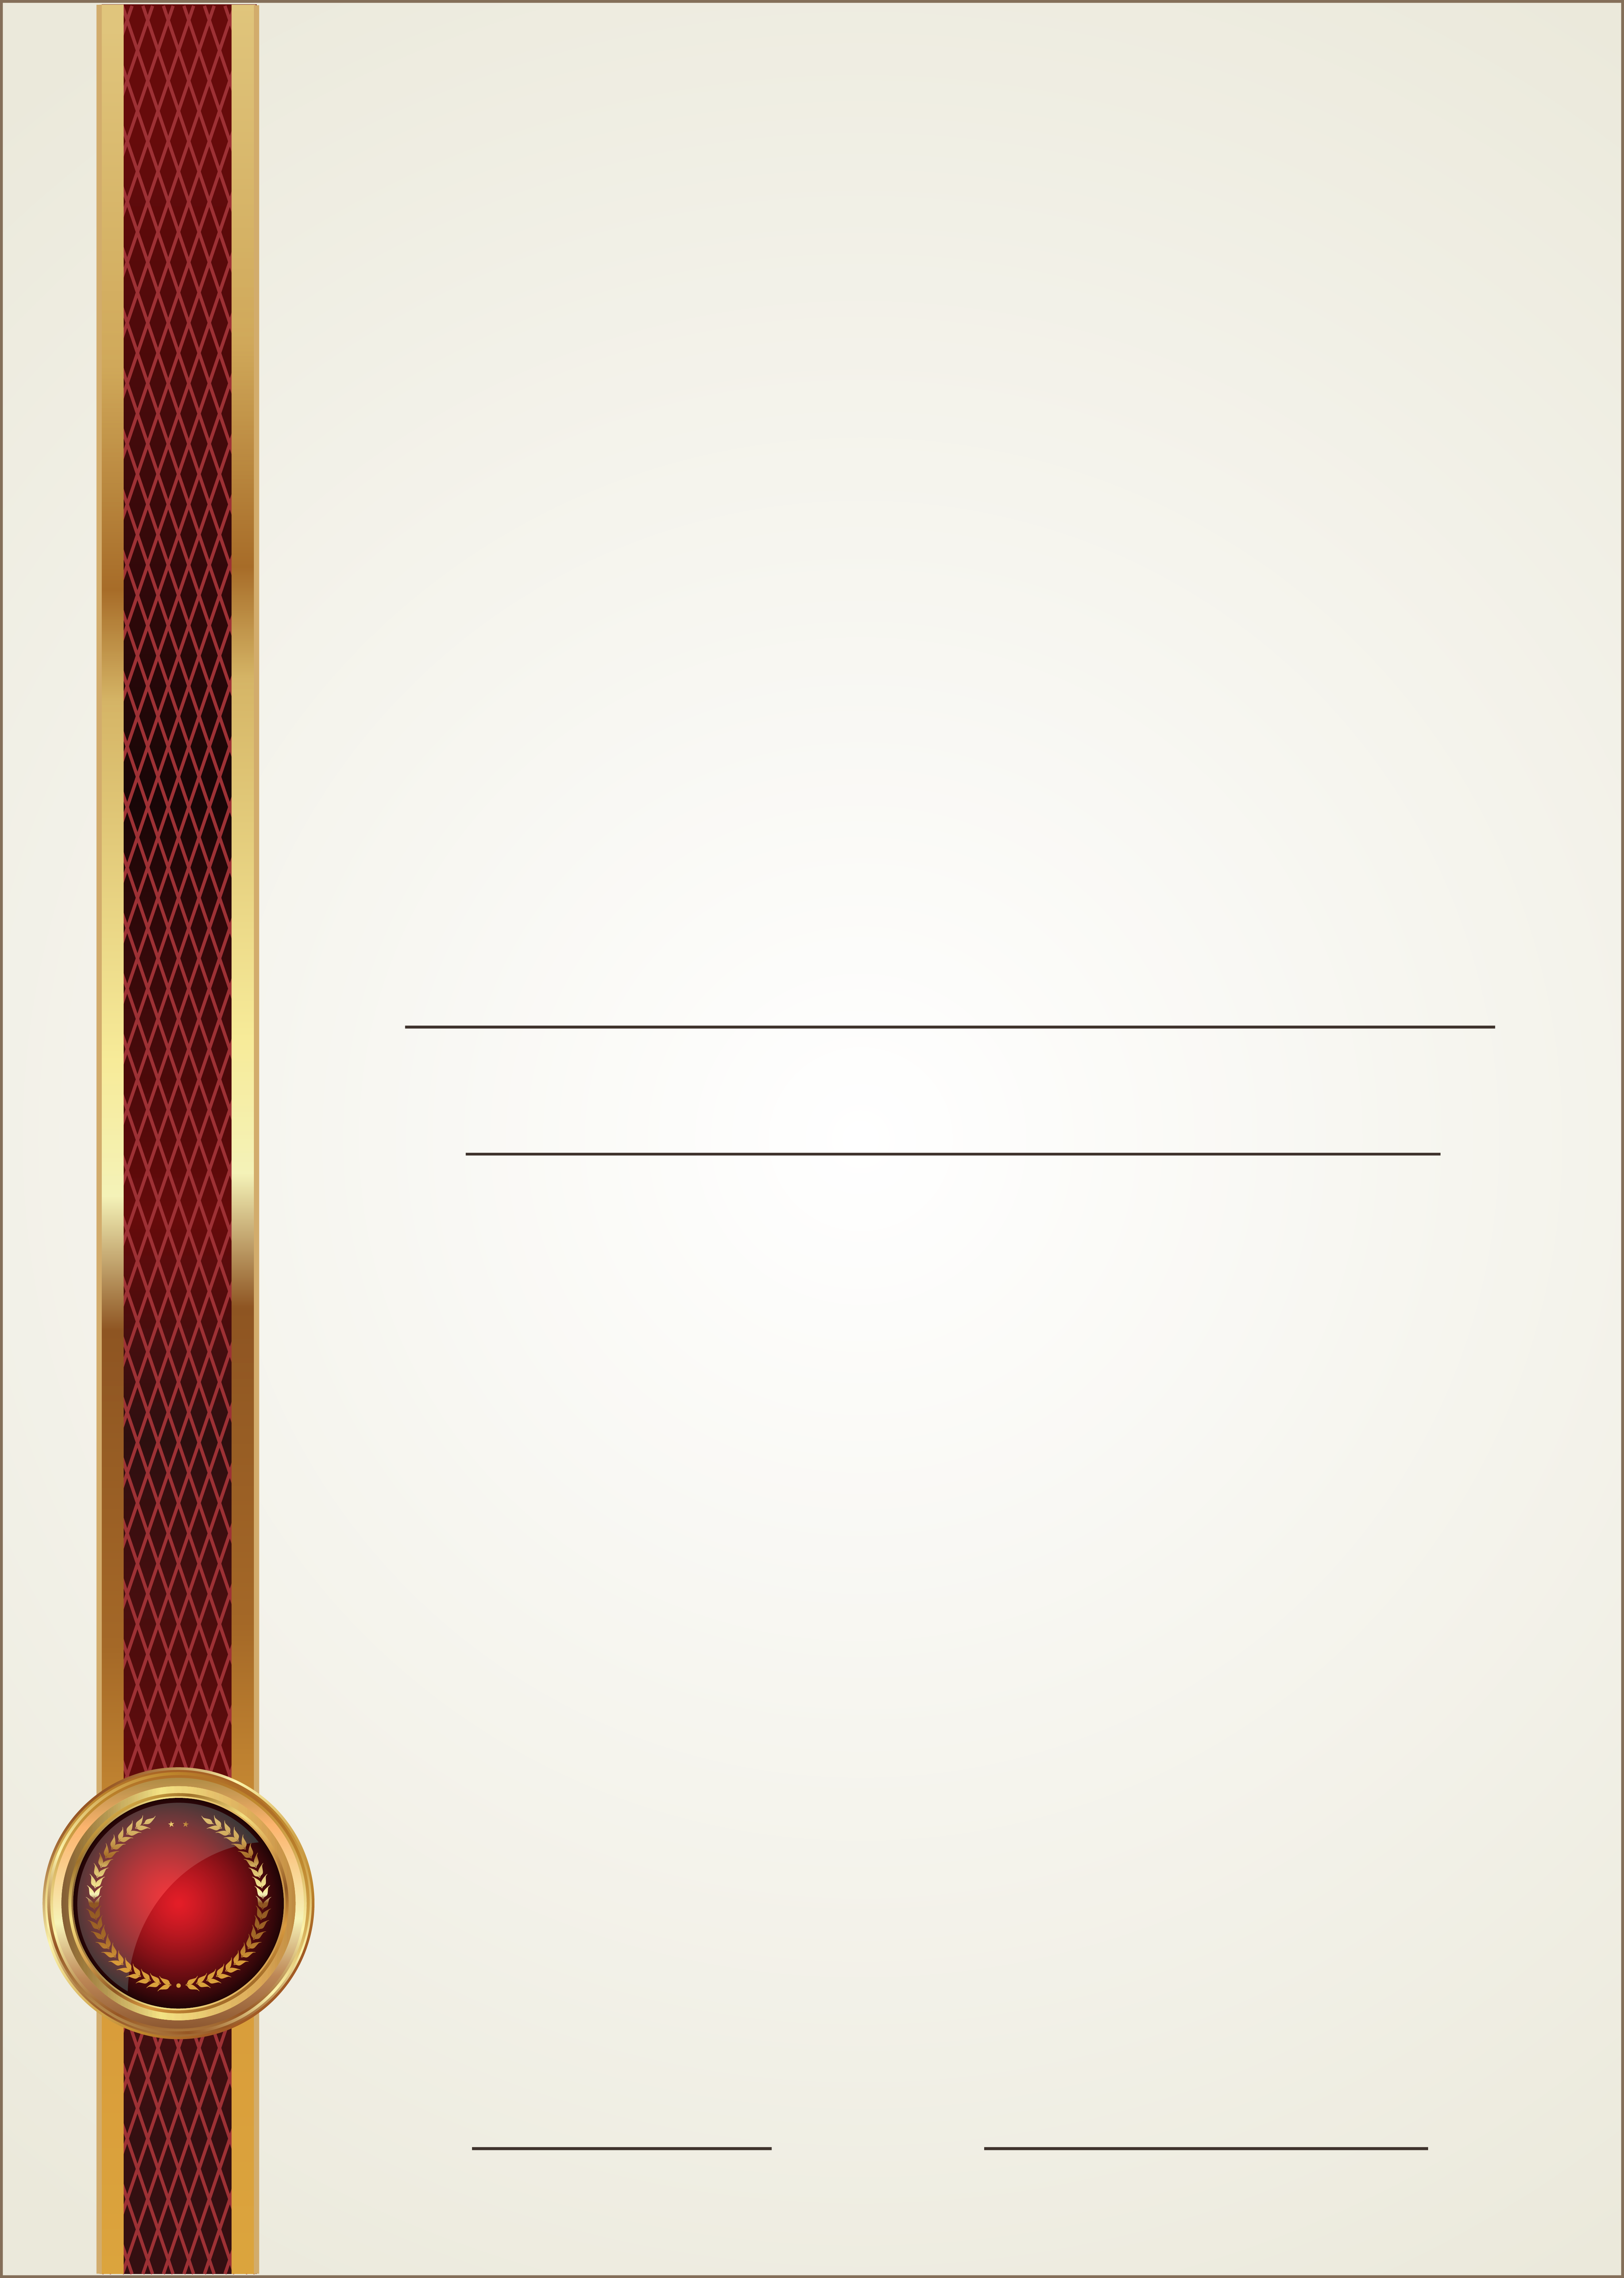 Certificate Template Blank from gallery.yopriceville.com